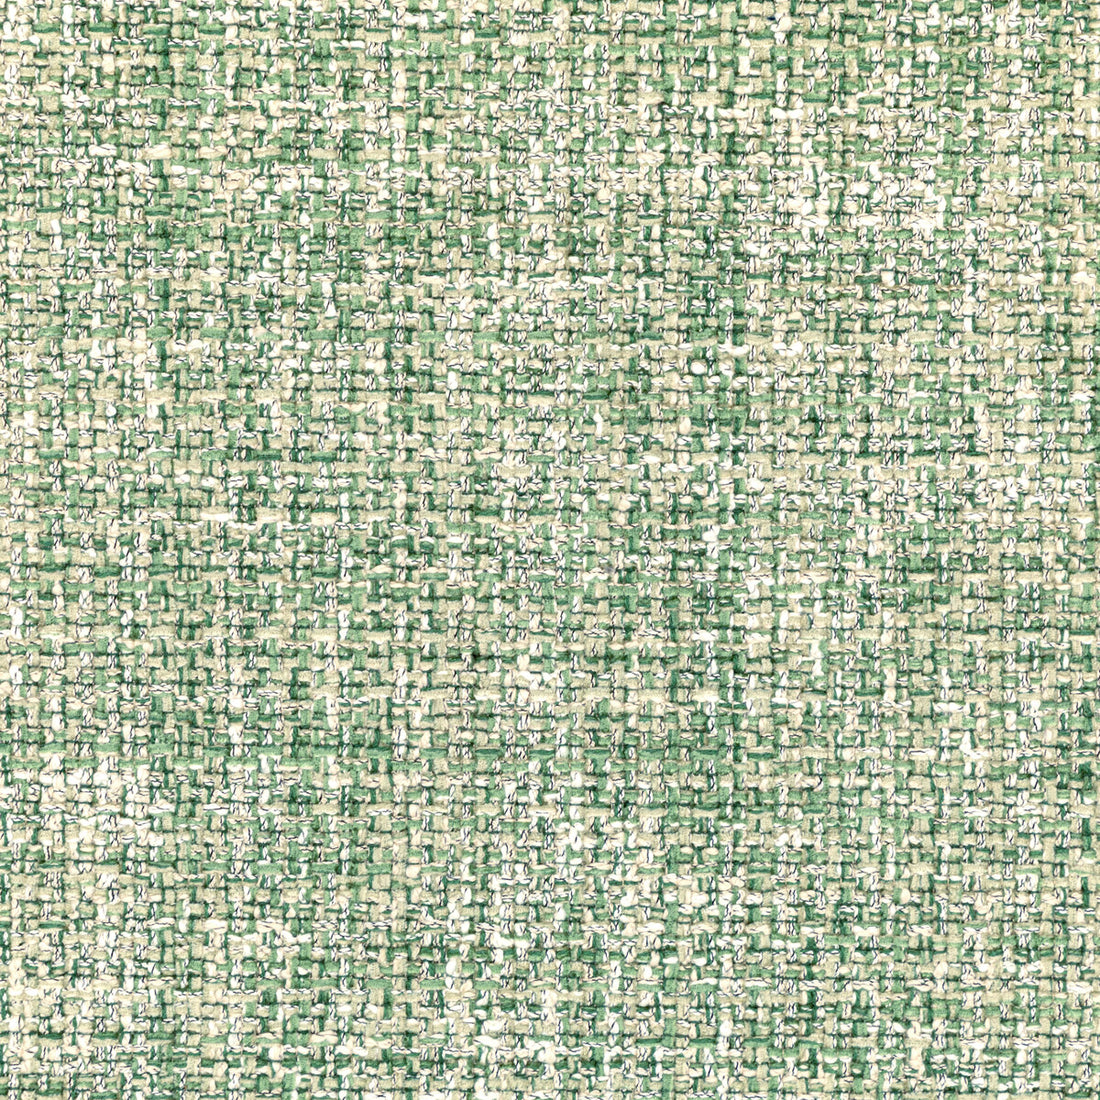 Tailored Plaid fabric in leaf color - pattern 36099.23.0 - by Kravet Couture in the Luxury Textures II collection